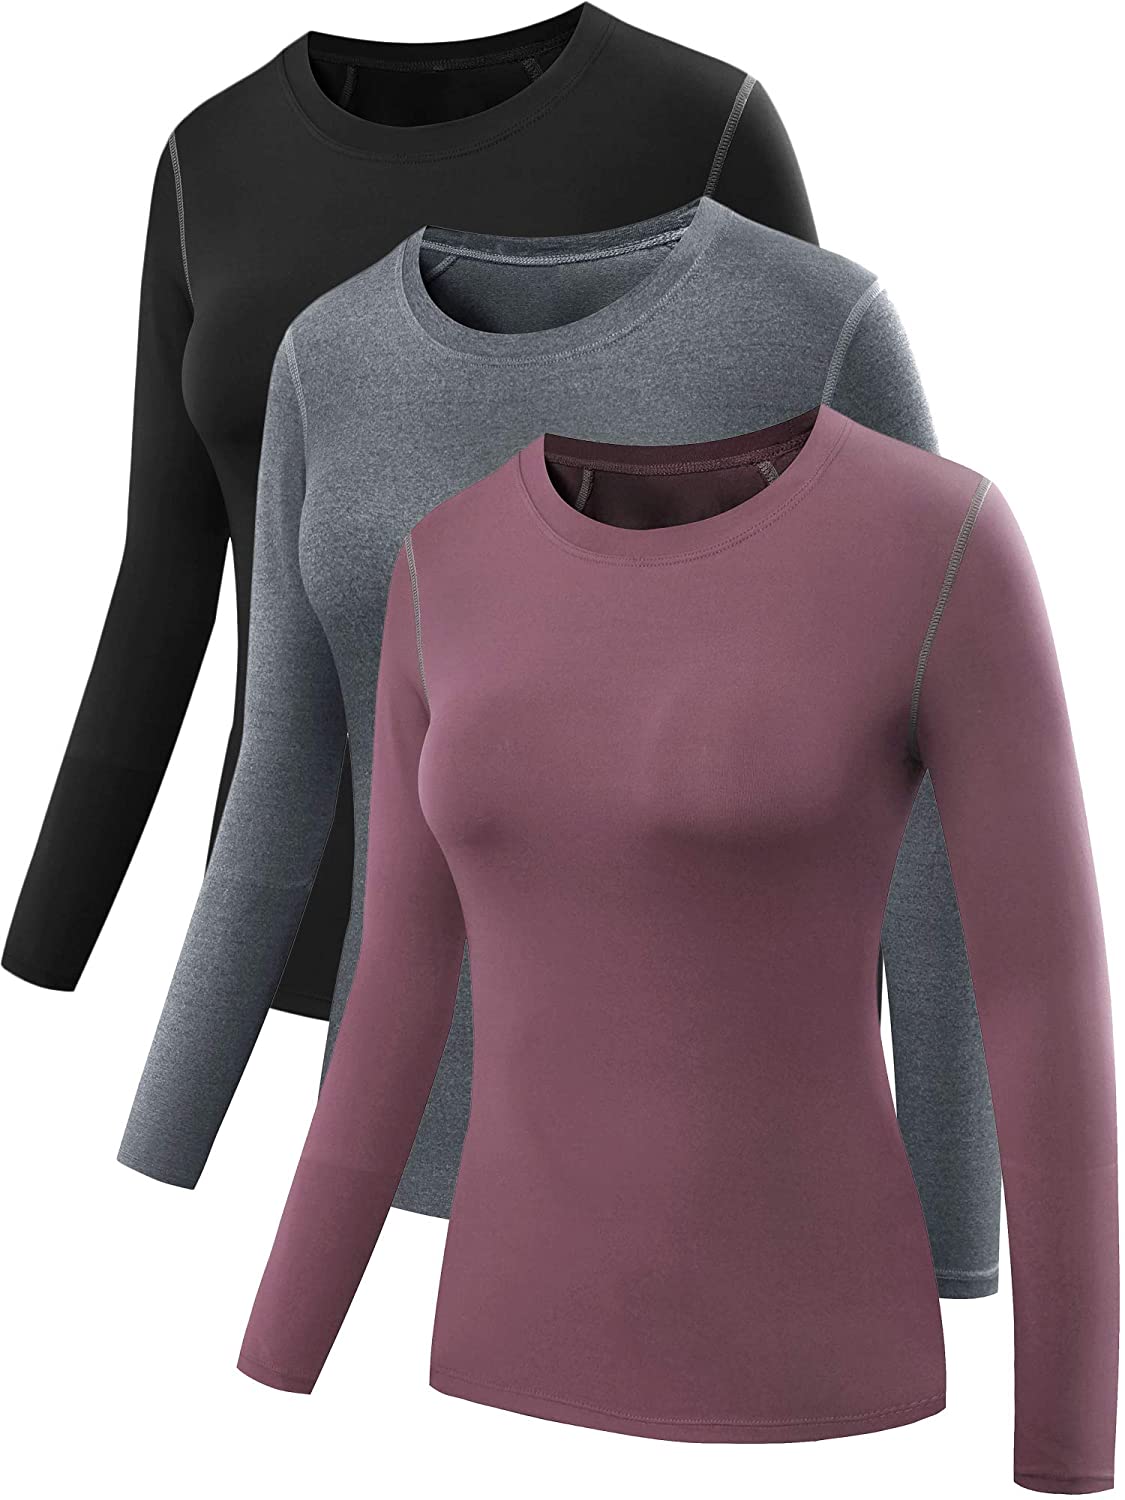 NELEUS Women's 3 Pack Athletic Compression Long Sleeve T Shirt Dry